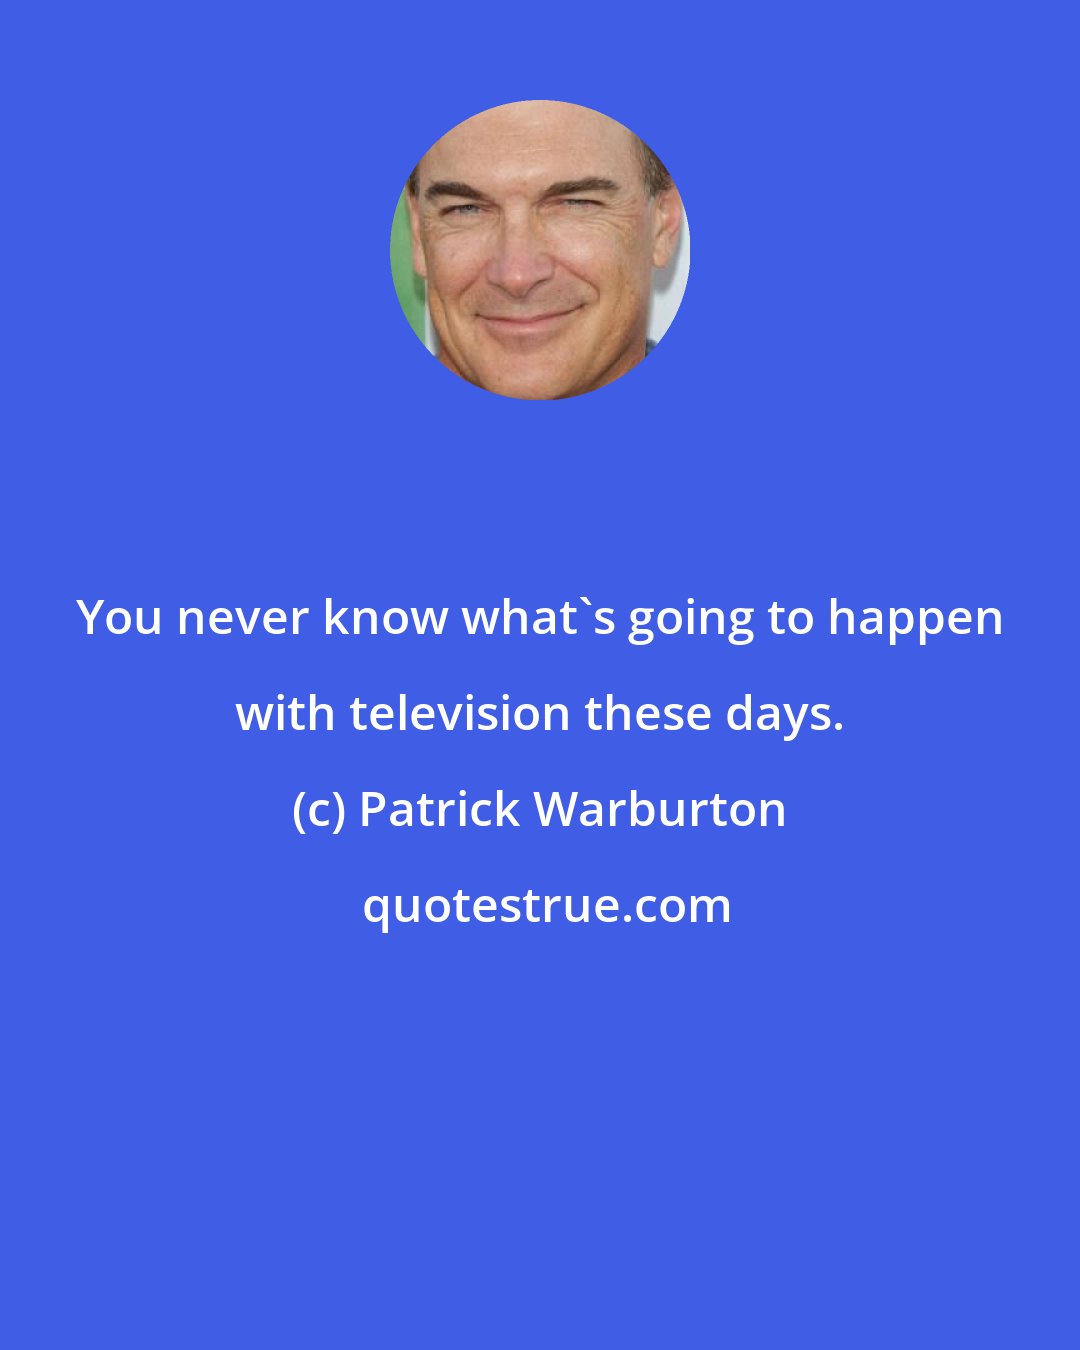 Patrick Warburton: You never know what's going to happen with television these days.